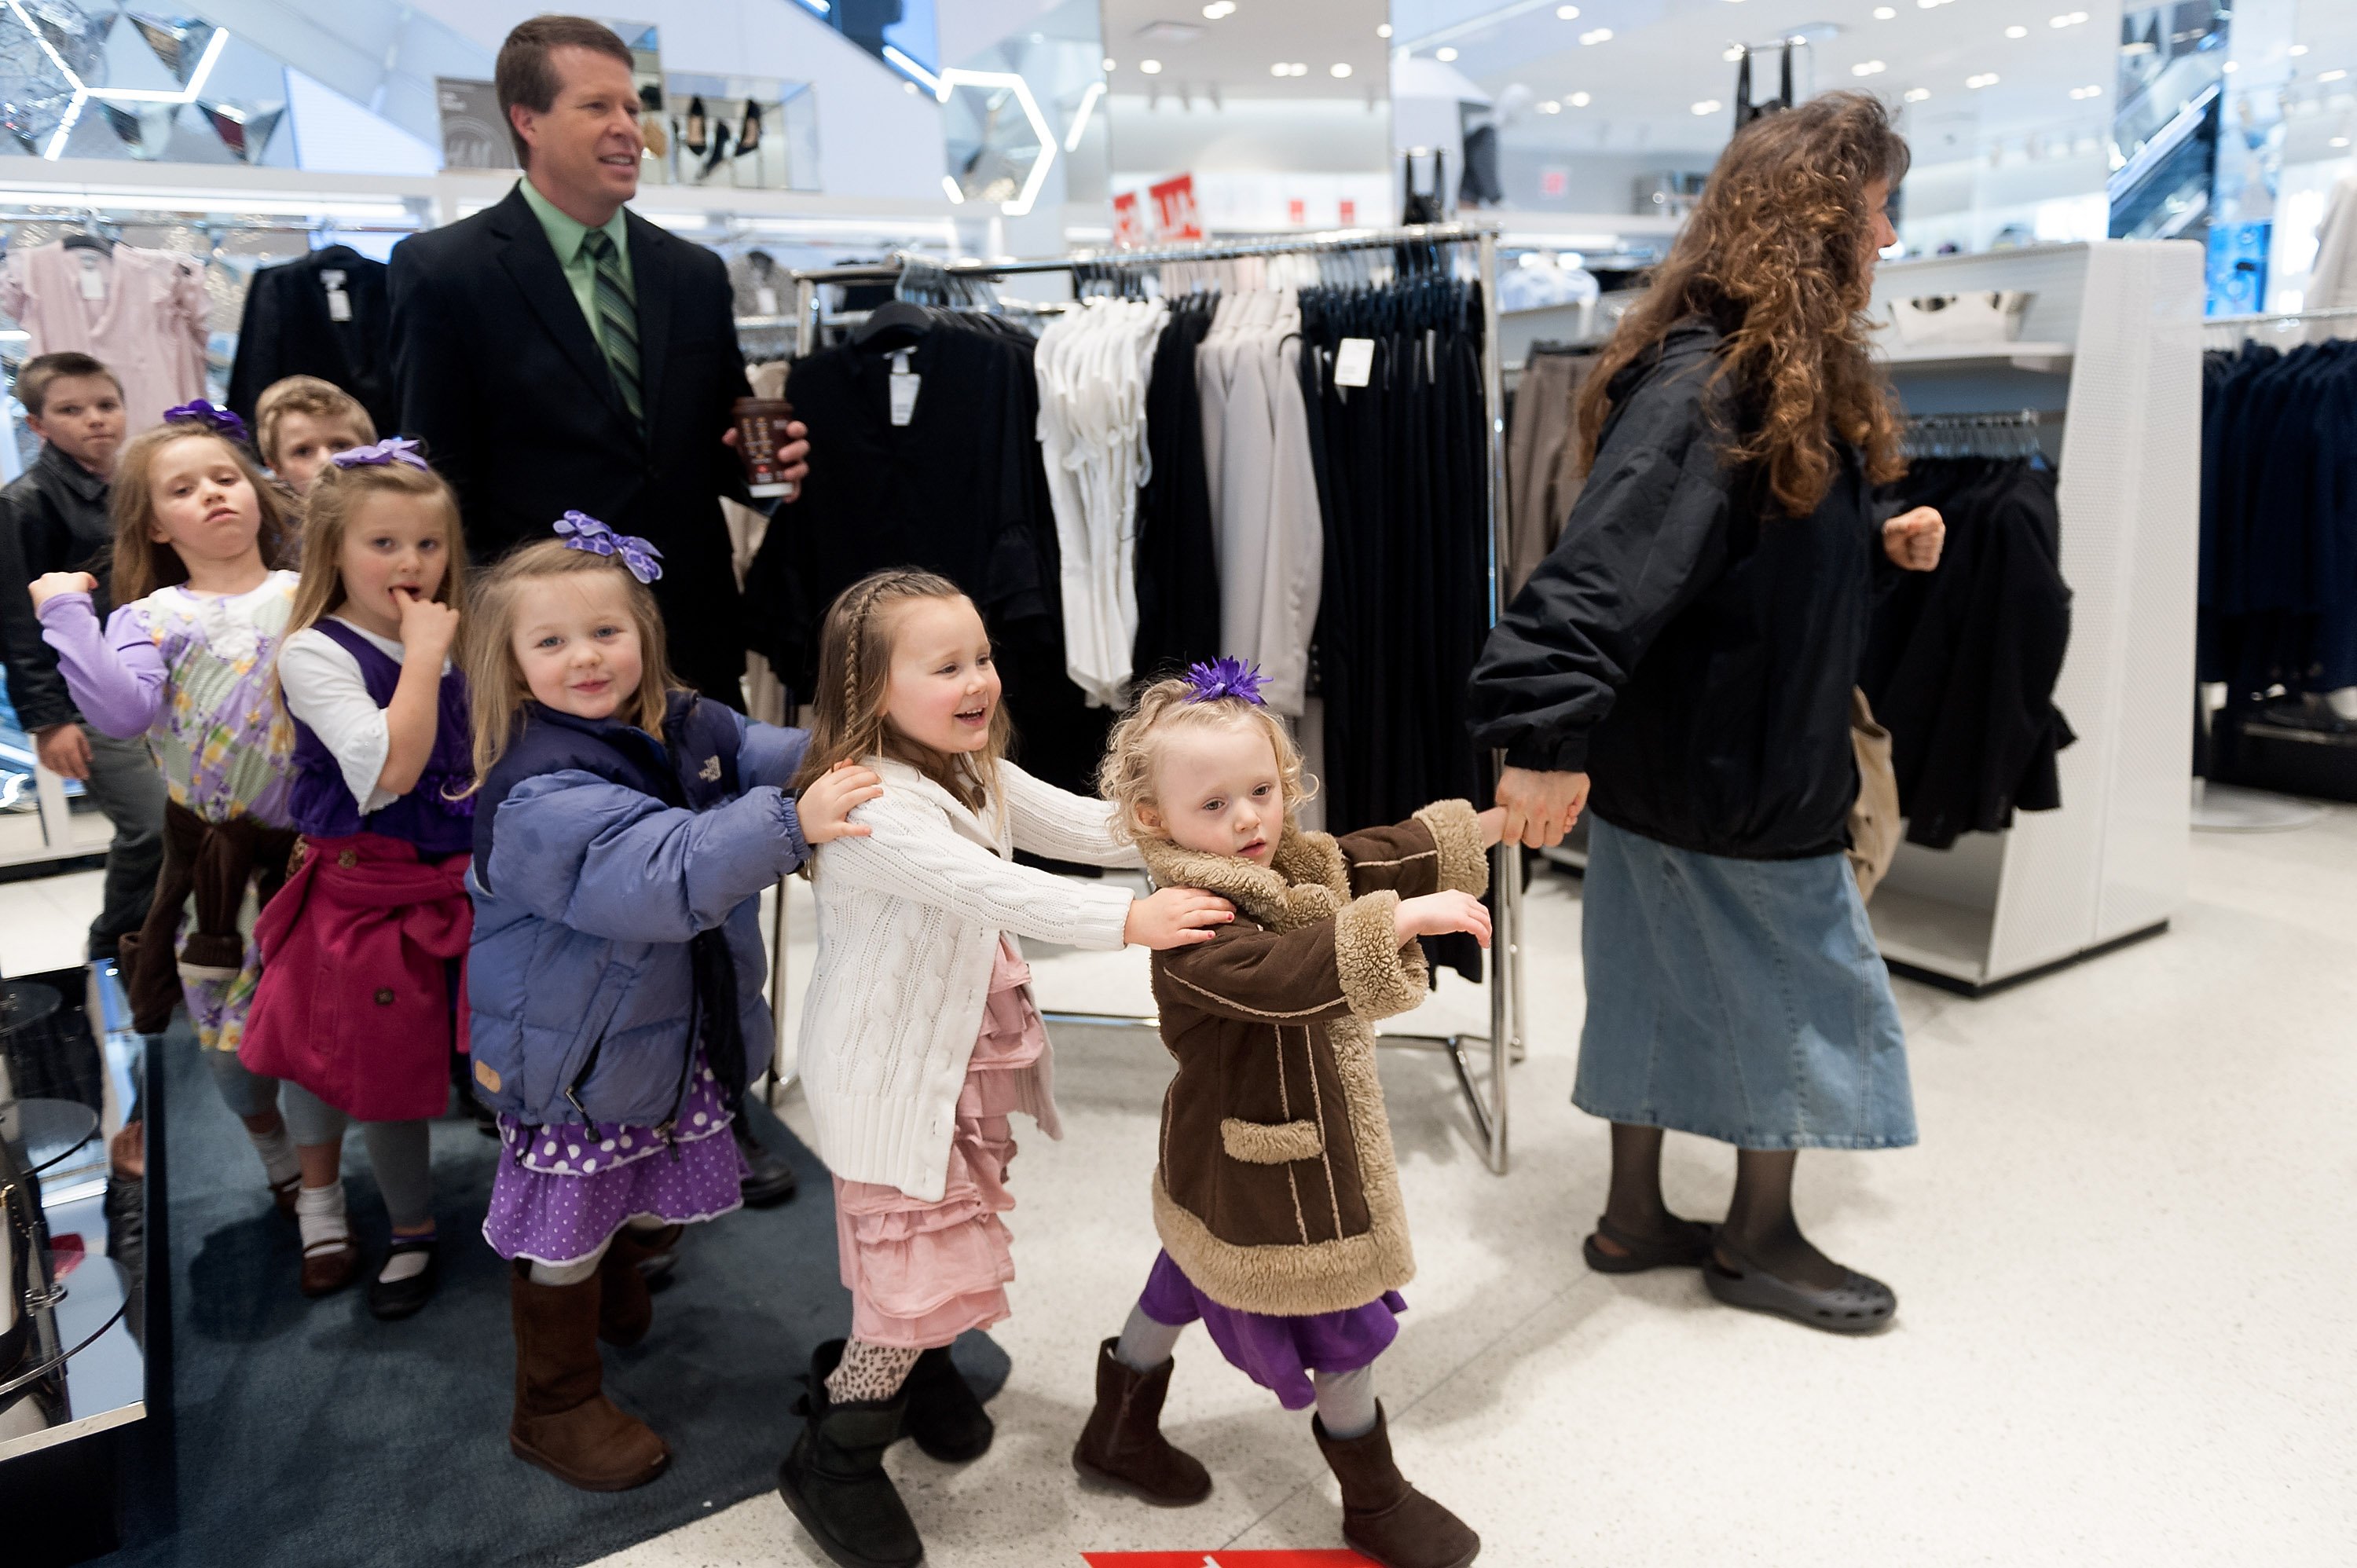 Jim Bob and Michelle Duggar guide their youngest children through a store during a visit to New York City 